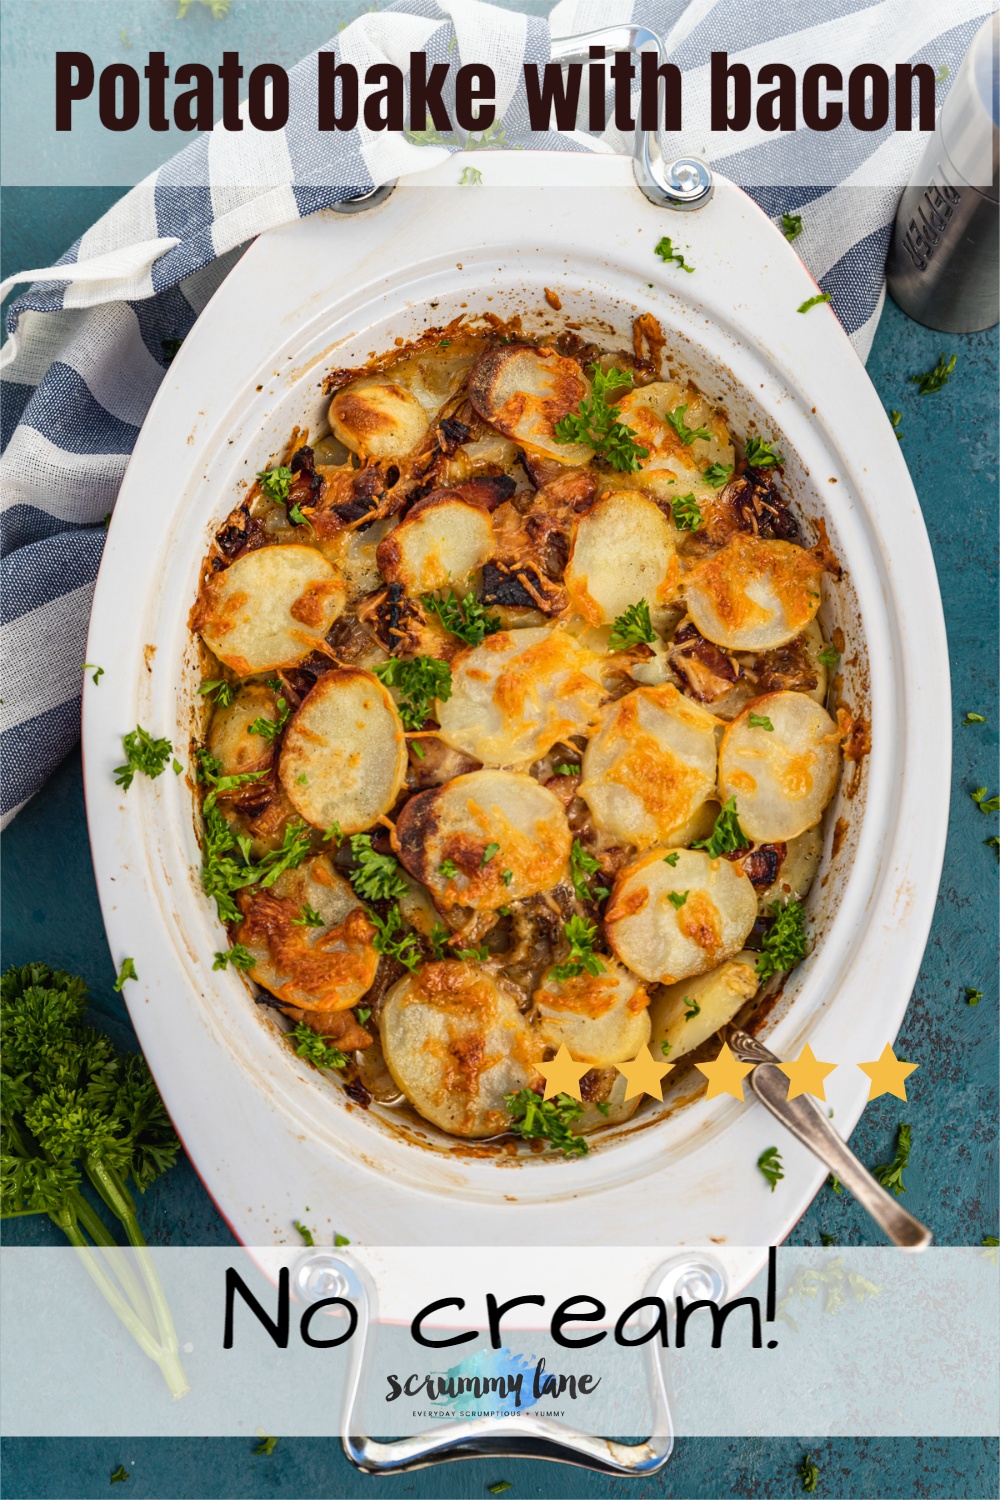 A potato bake with bacon or boulangere potatoes from above in an oval baking dish with a blue and white striped tea towel